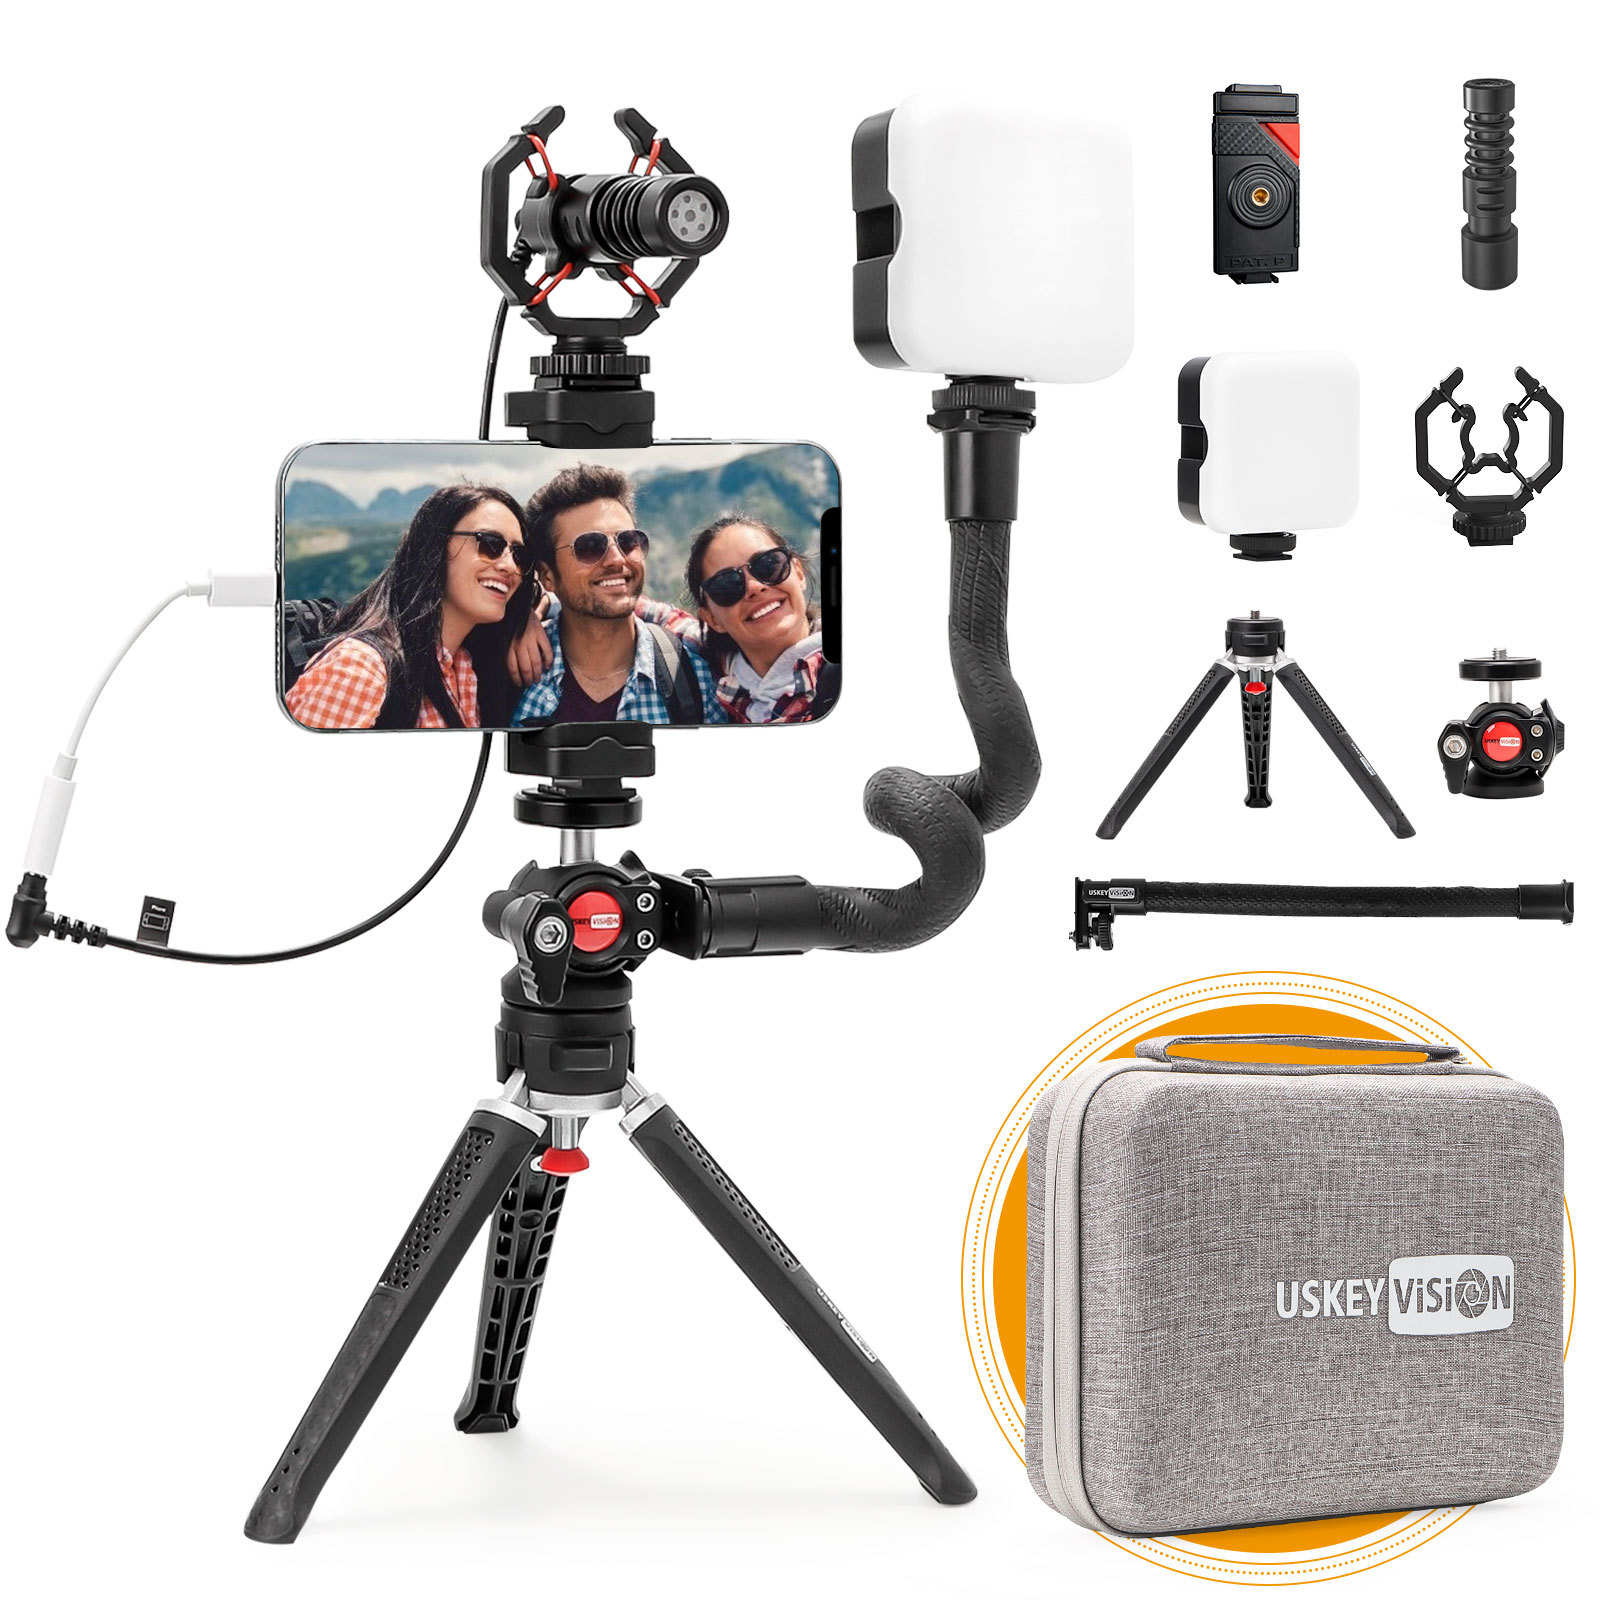 for Vloggers USKEYVISION Smartphone Video Kit K3+ 1.55X Anamorphic Lens for iPhone and Smartphones Youtuber. 